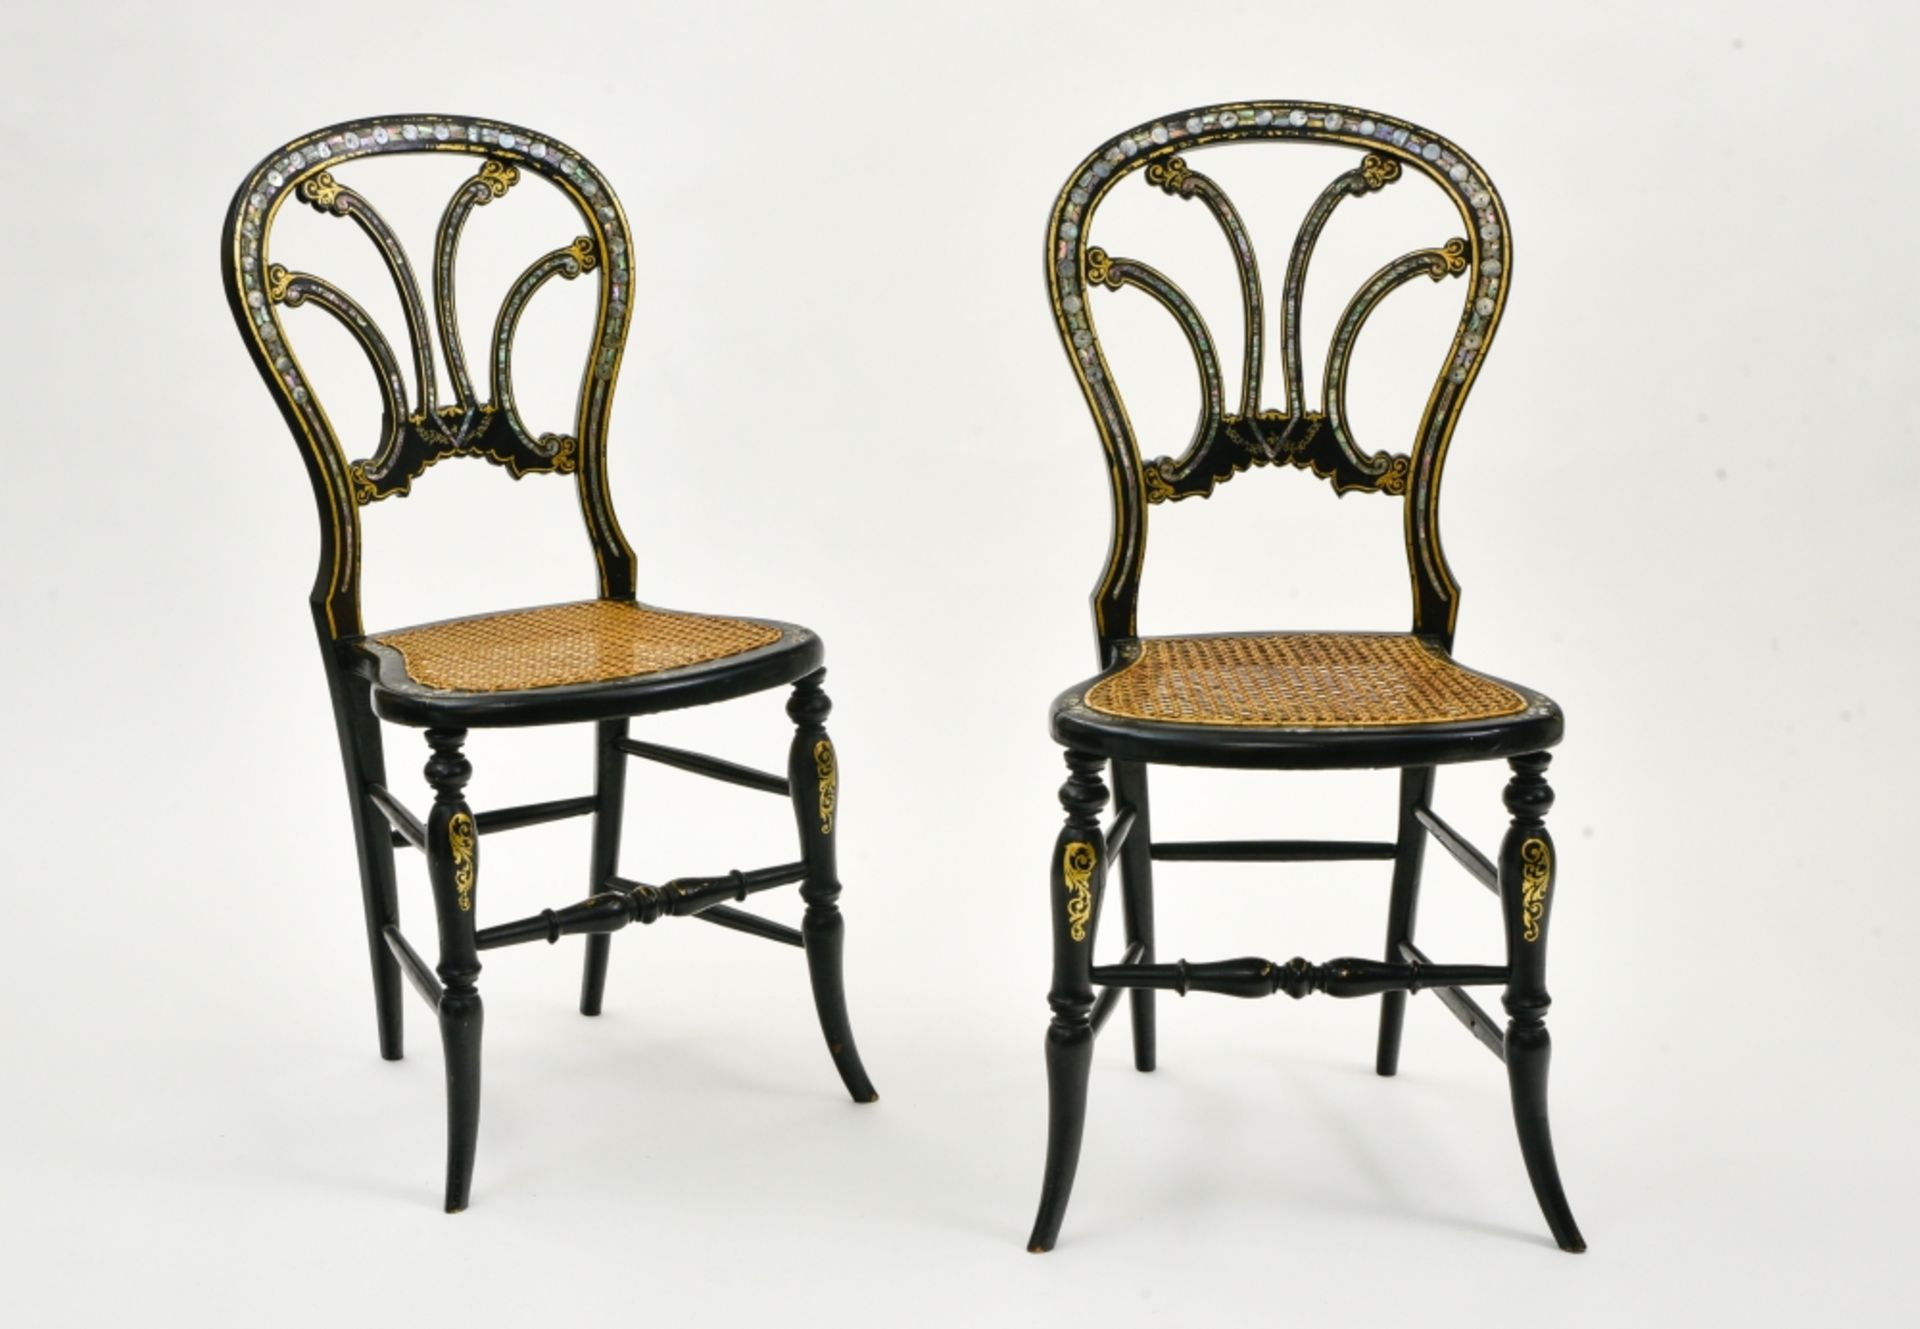 Pair of chairs NAPOLEON III-STYLE WORK black and gold lacquered wood, inlaid with mother-of-pearl - Image 2 of 3